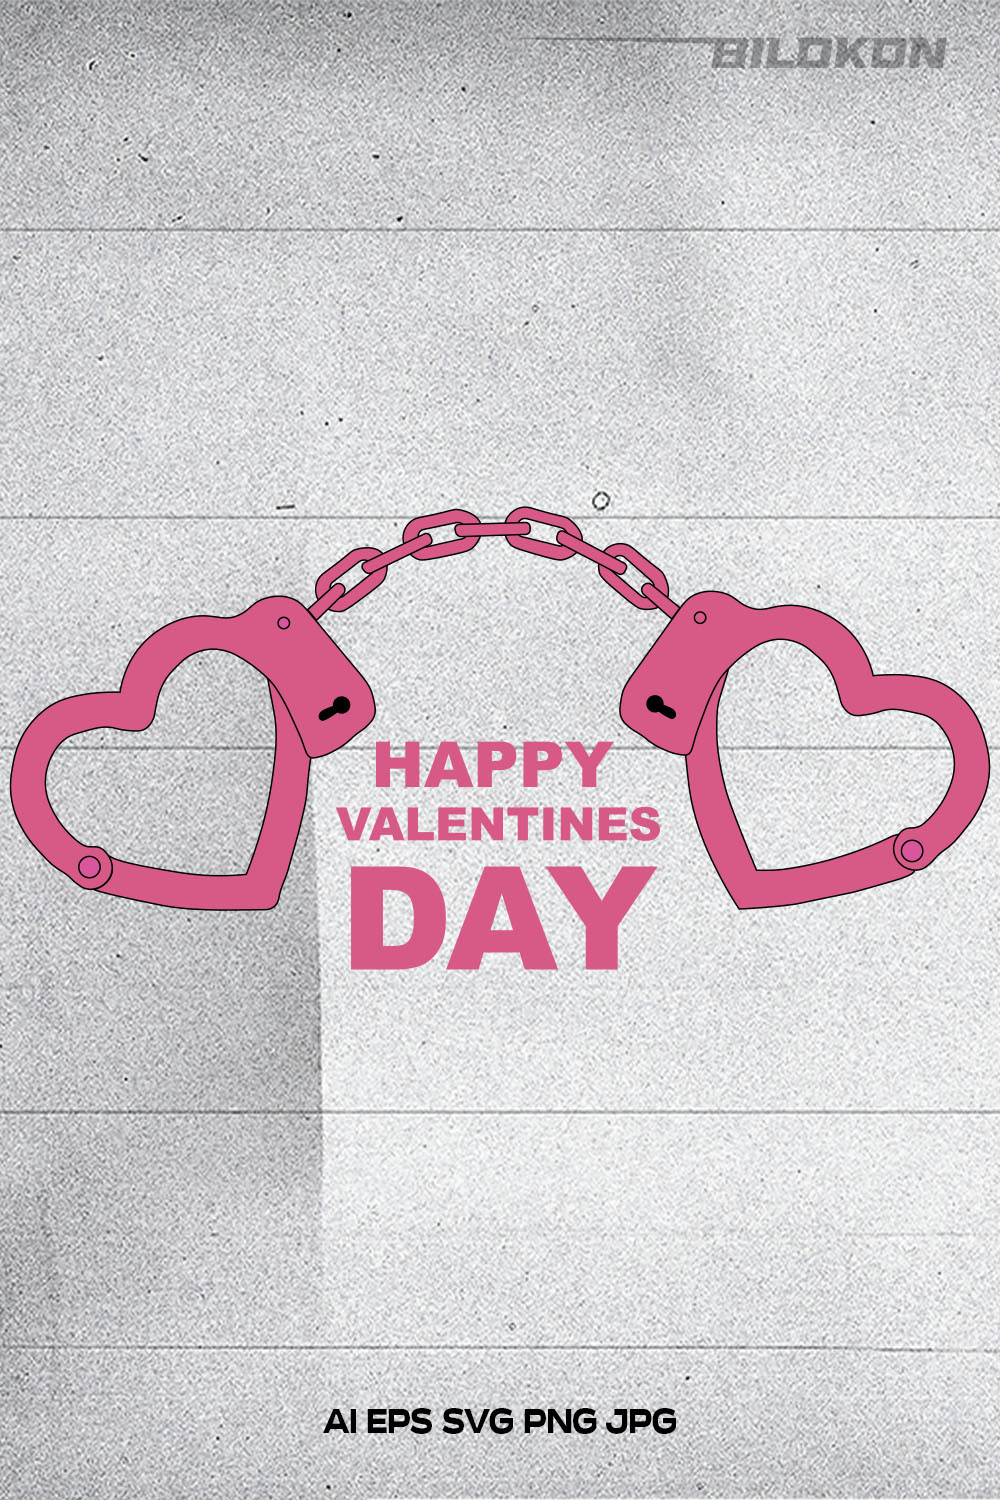 Valentine's Day Handcuffs in the Shape of a Heart SVG pinterest image.